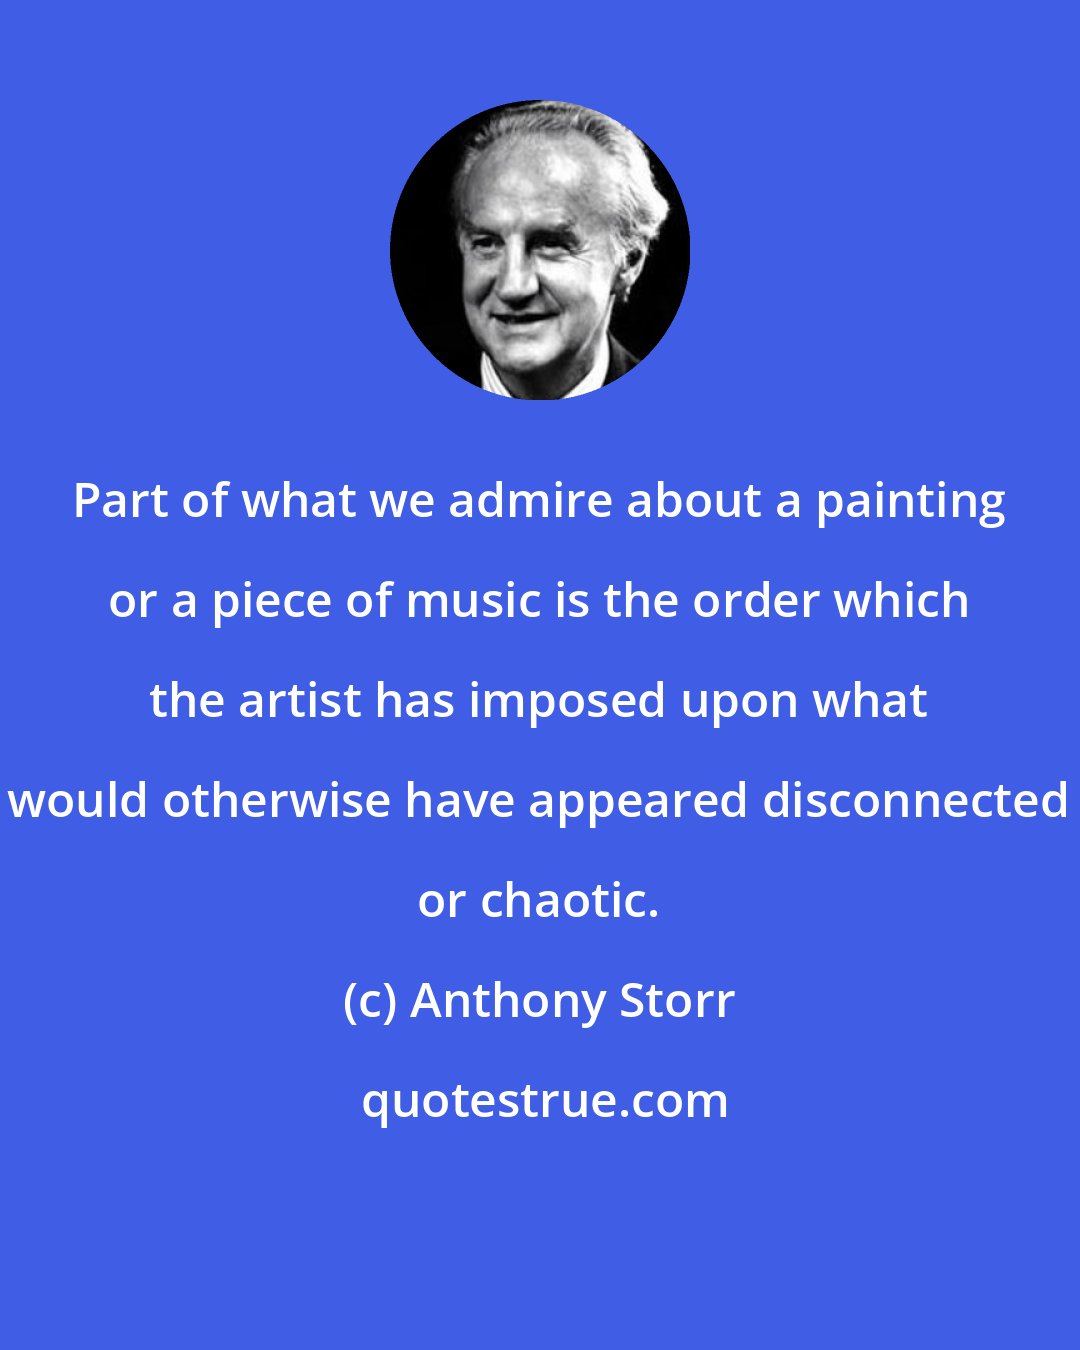 Anthony Storr: Part of what we admire about a painting or a piece of music is the order which the artist has imposed upon what would otherwise have appeared disconnected or chaotic.